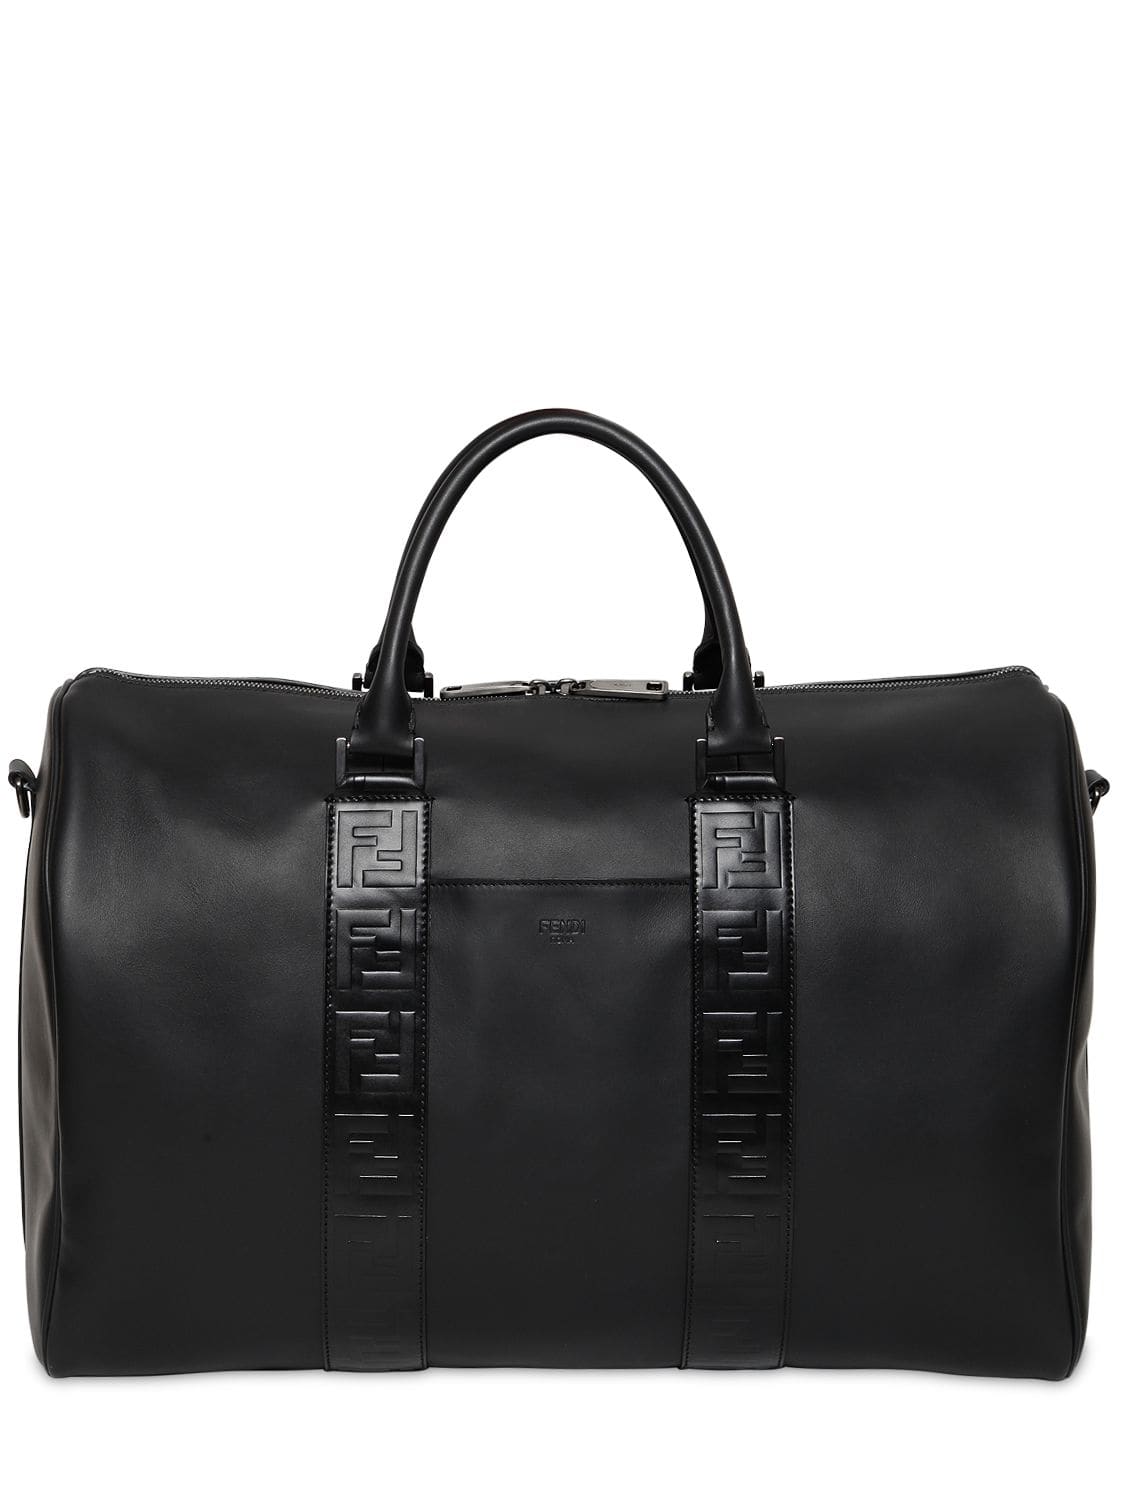 Ff Embossed Leather Duffle Bag | The Fashionisto